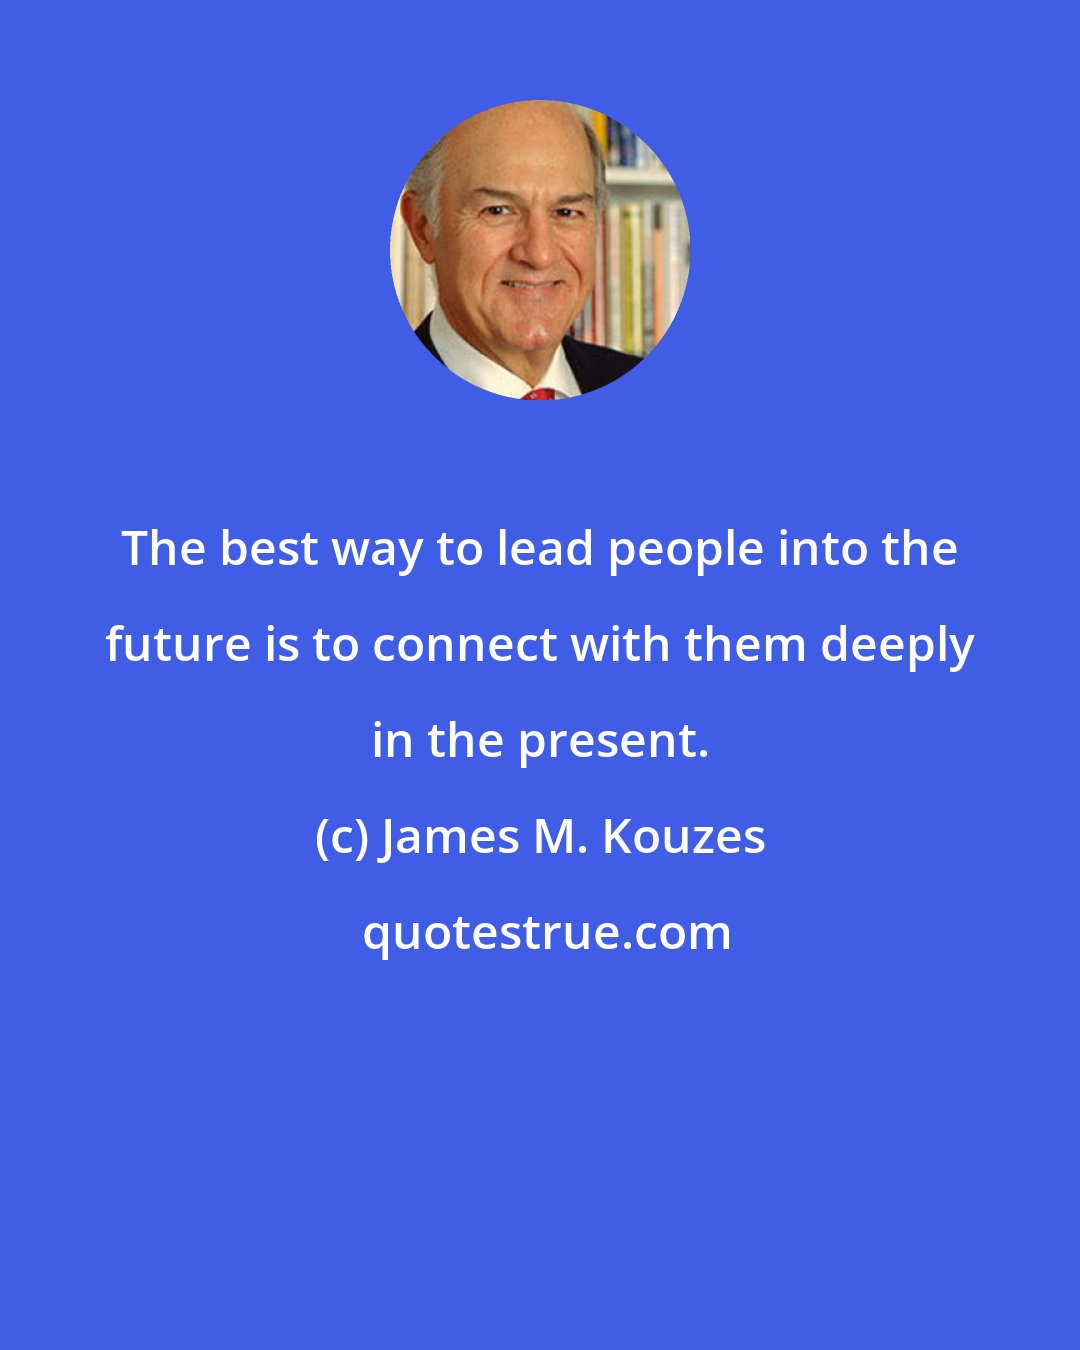 James M. Kouzes: The best way to lead people into the future is to connect with them deeply in the present.